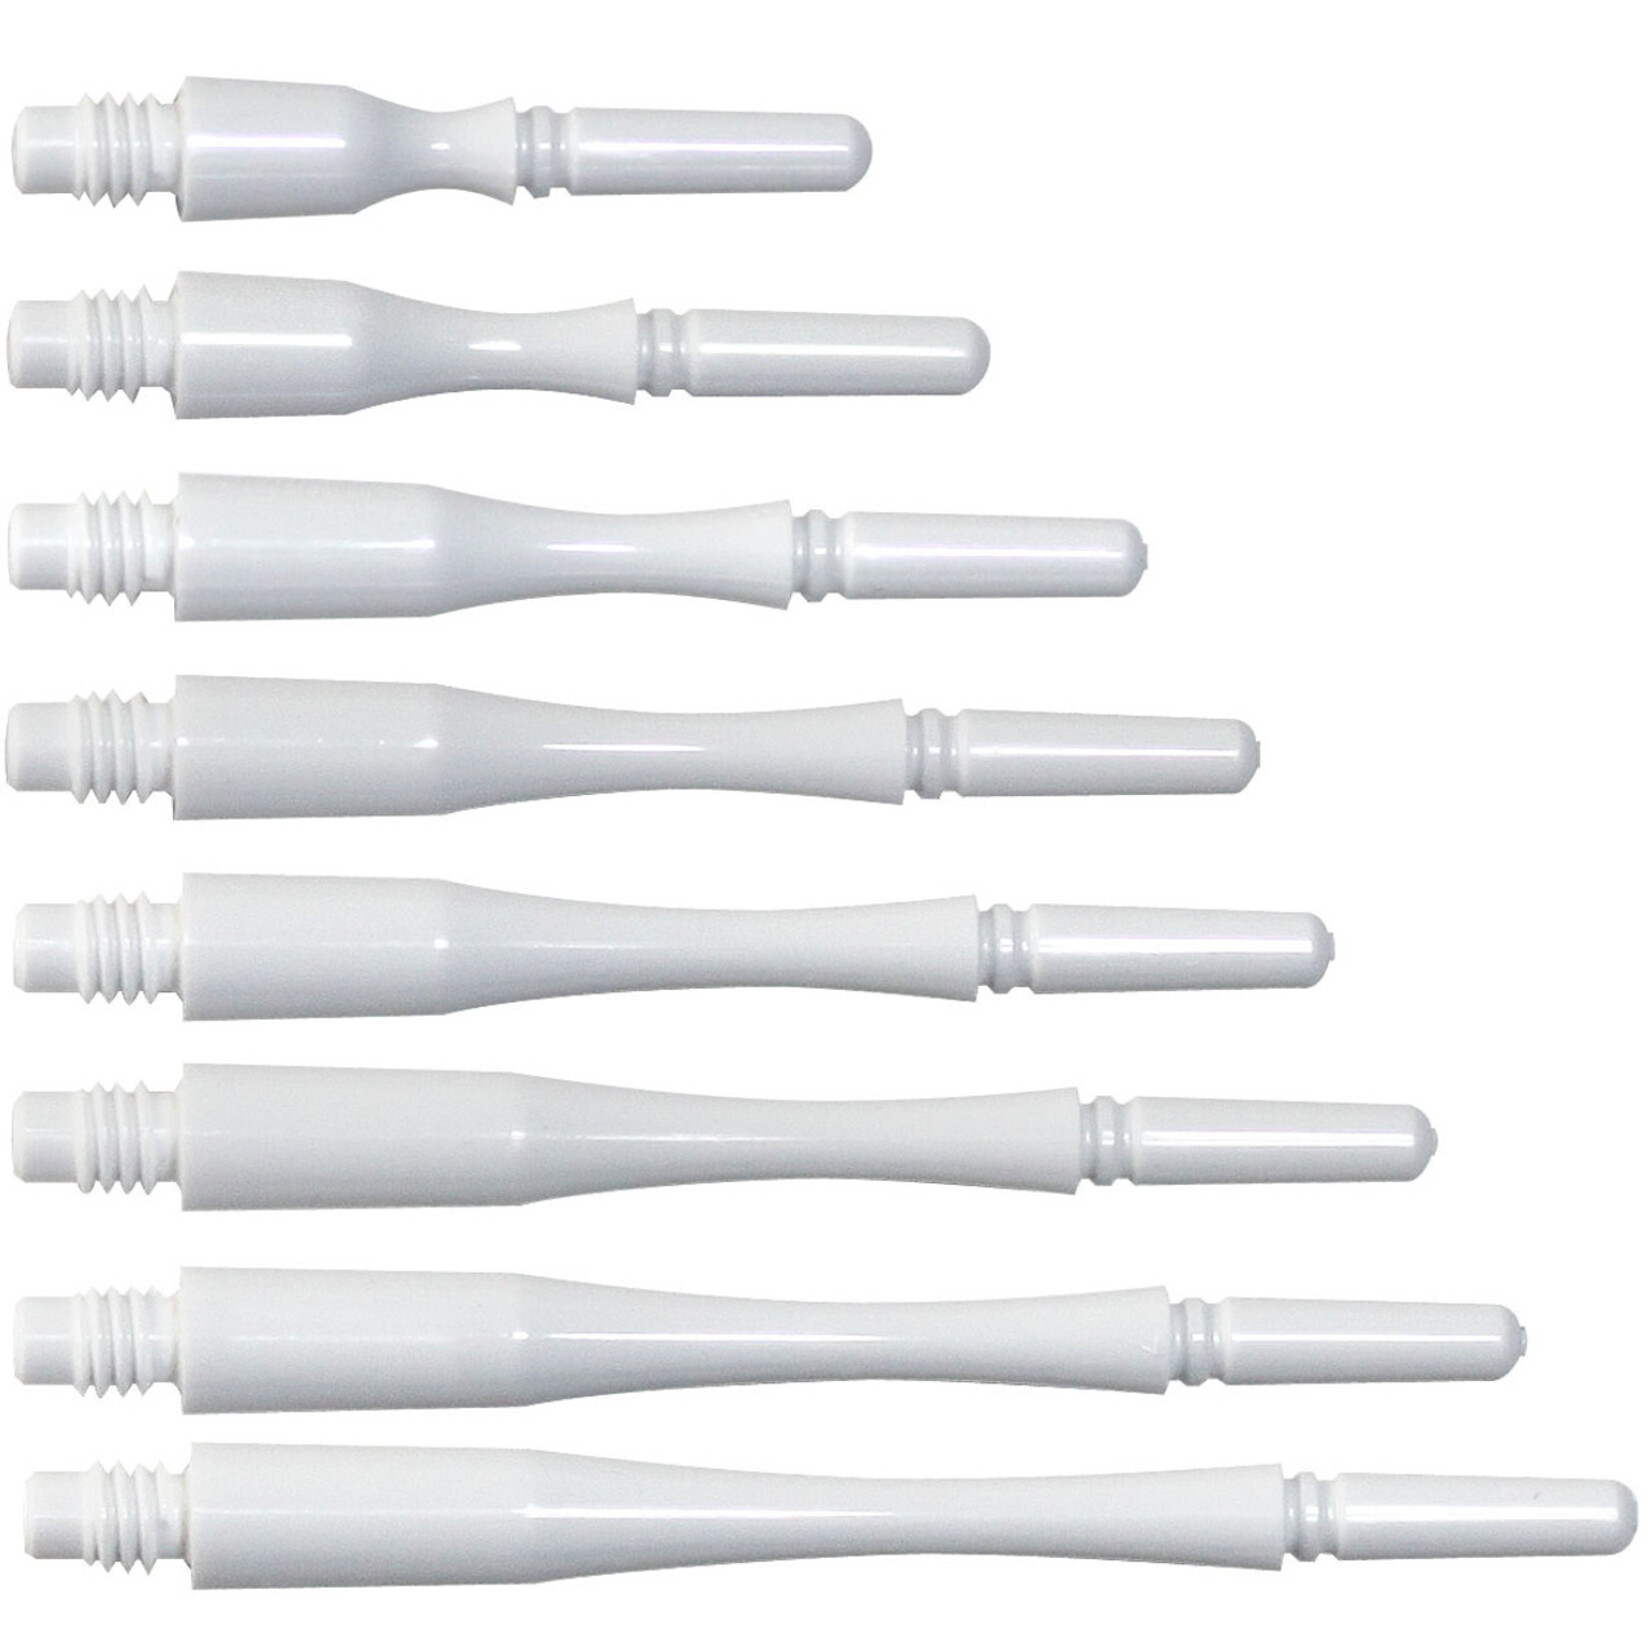 COSMO DARTS Cosmo Fit Gear Hybrid Spinning White Dart Shafts